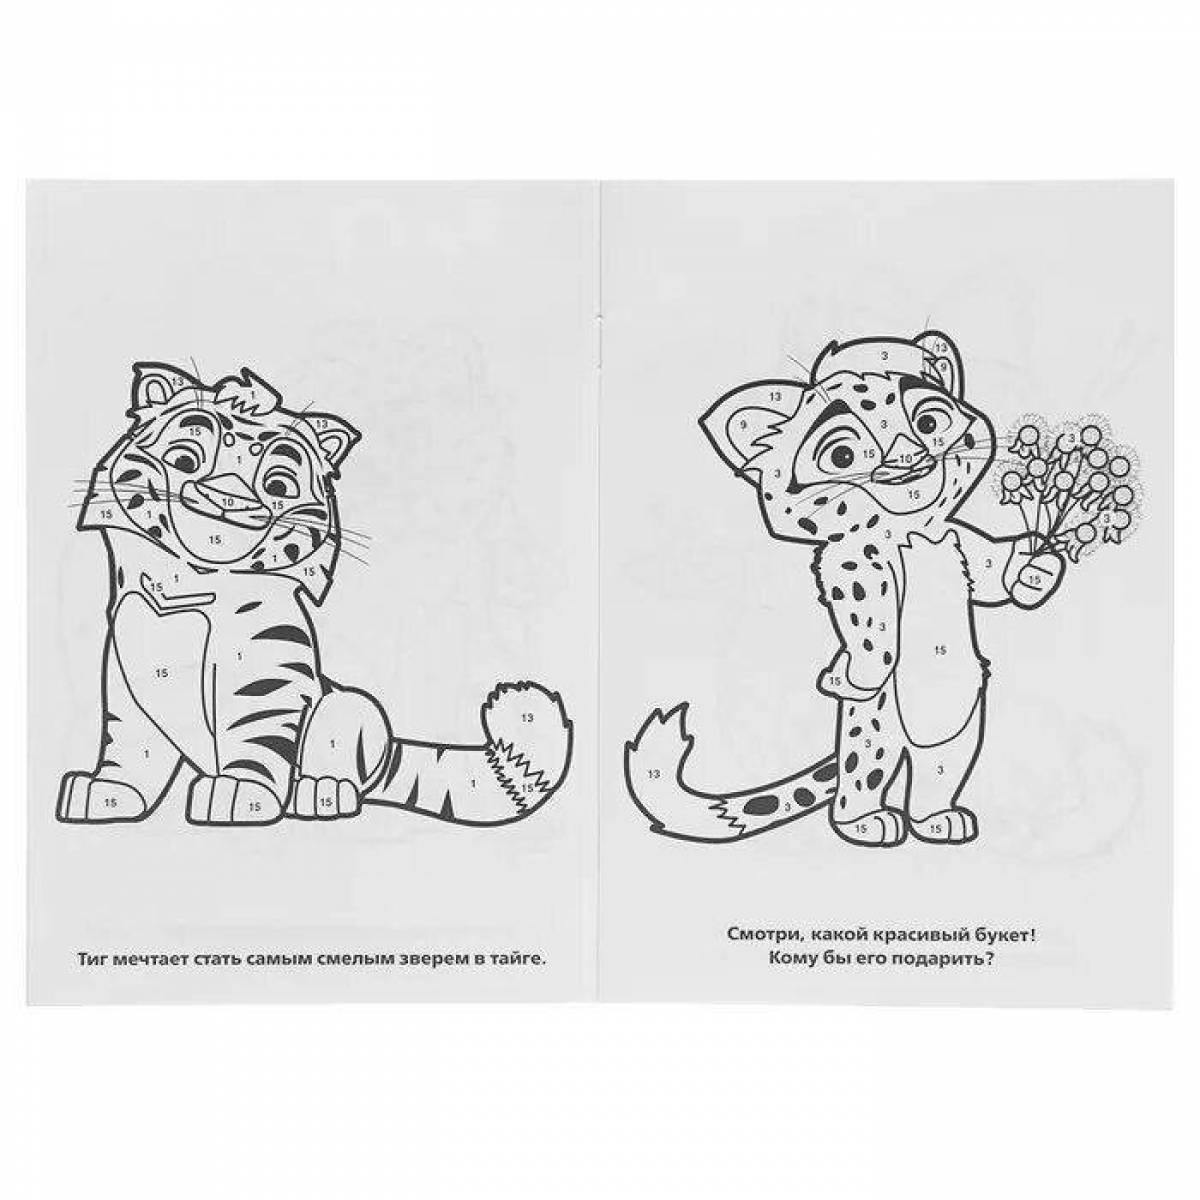 Delightful coloring pages of leo and tig